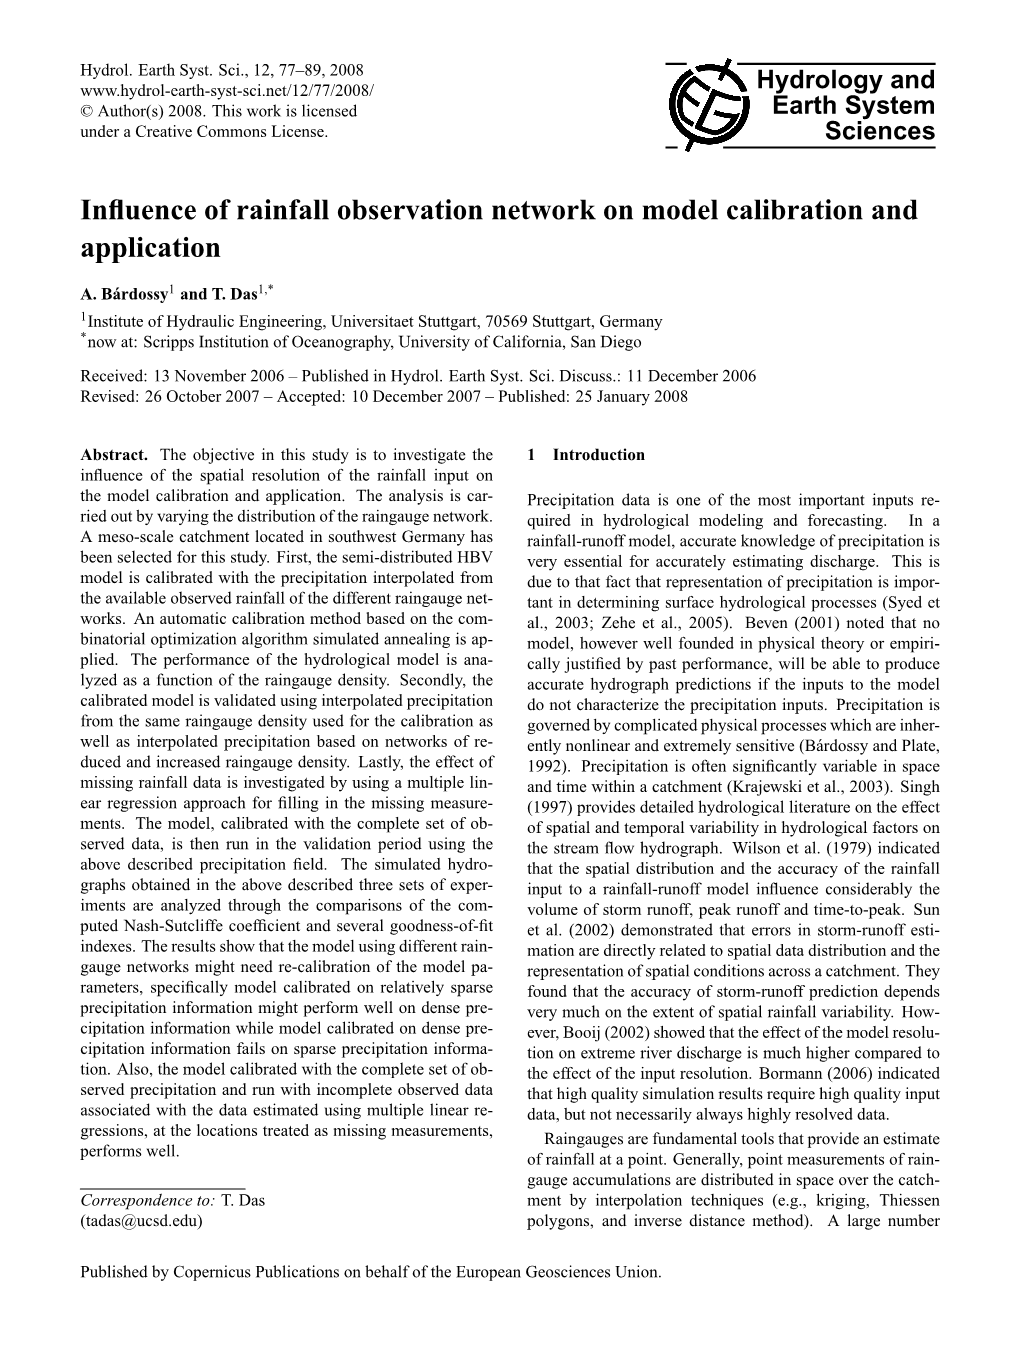 Influence of Rainfall Observation Network on Model Calibration And